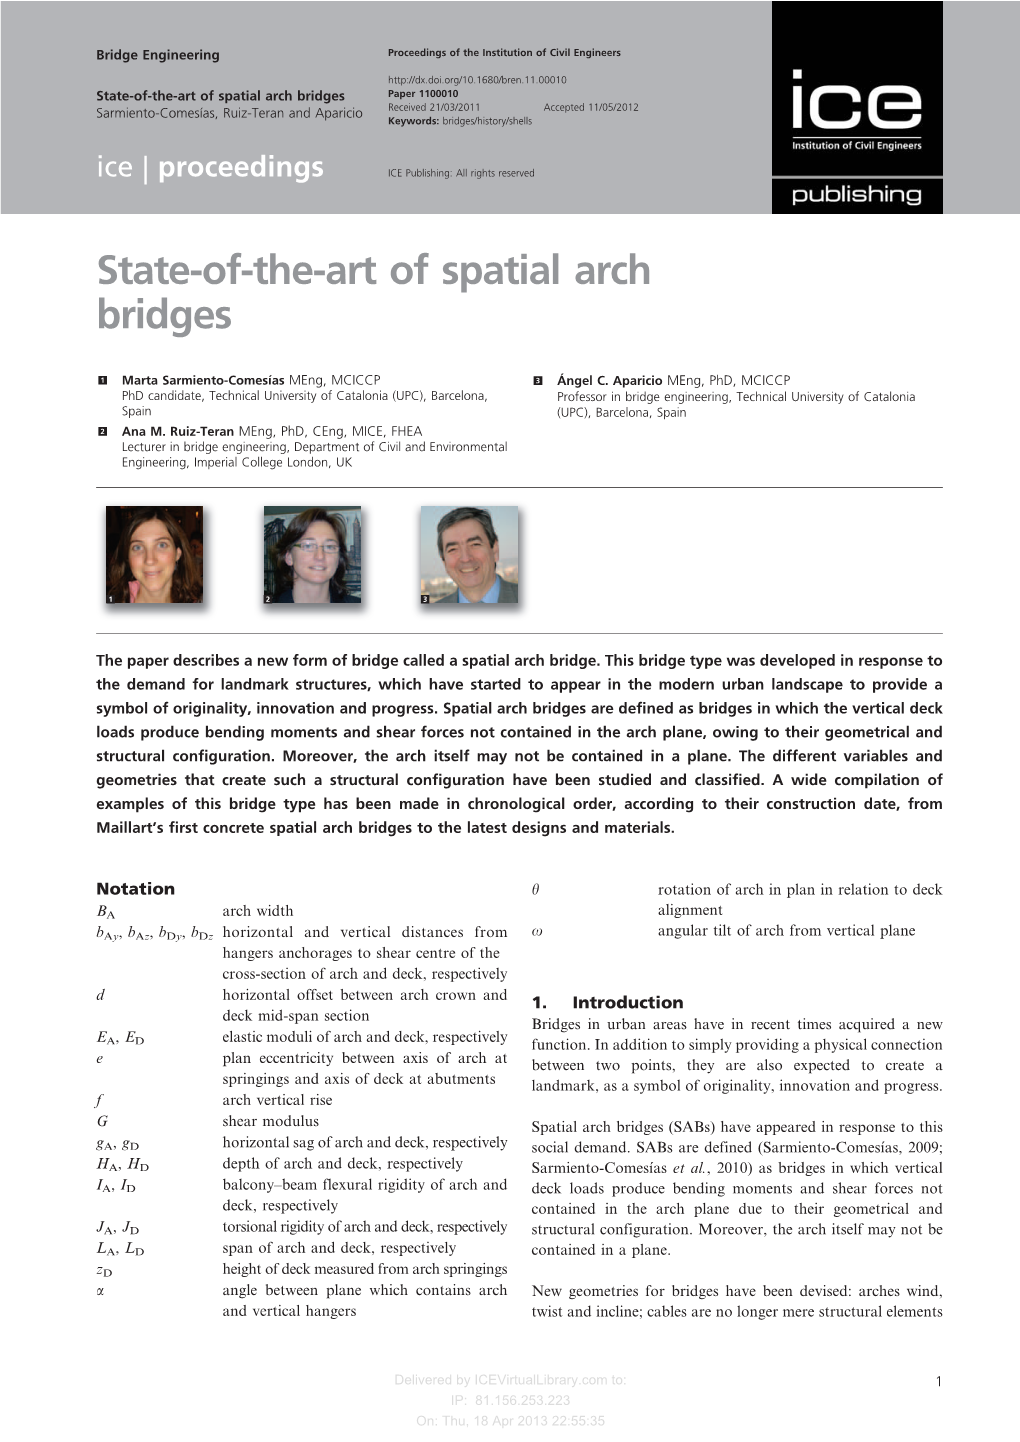 State-Of-The-Art of Spatial Arch Bridges